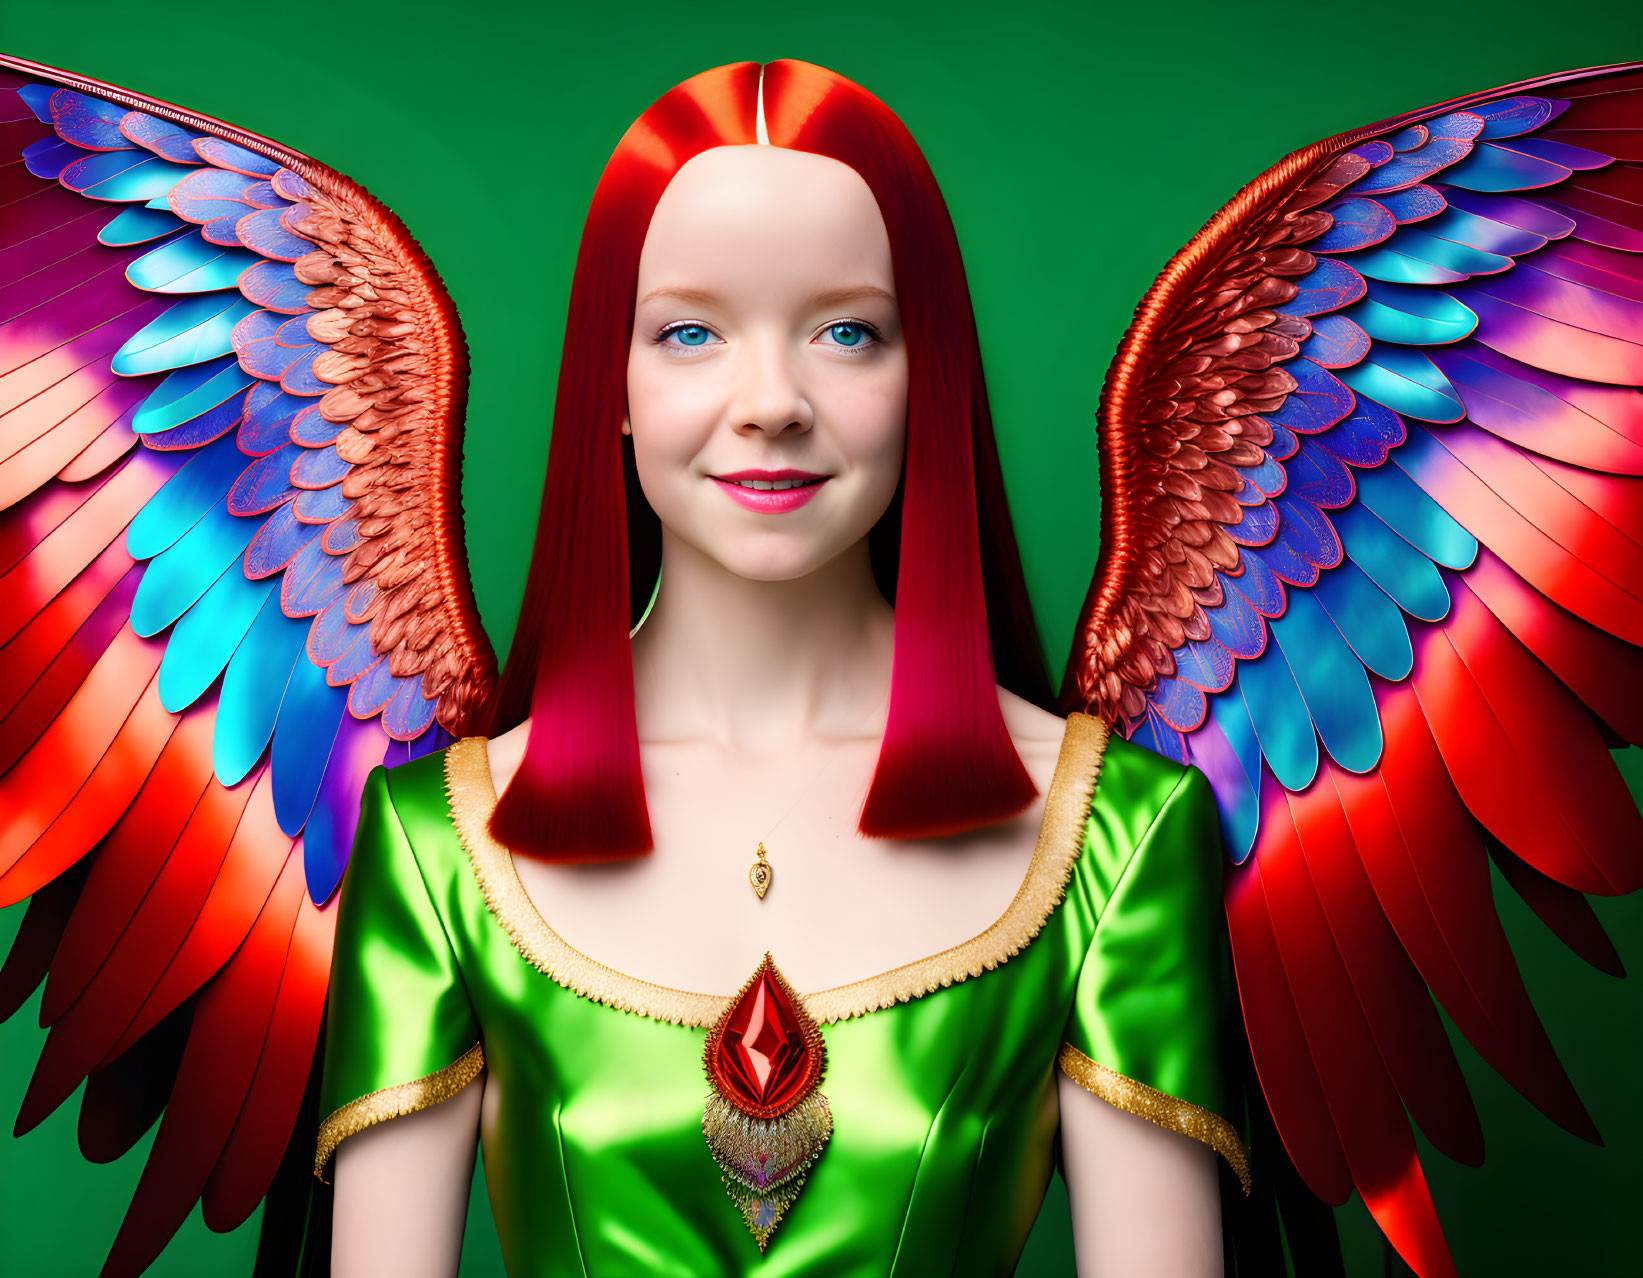 Colorful fantasy illustration of smiling woman with red hair and bird wings in green dress.